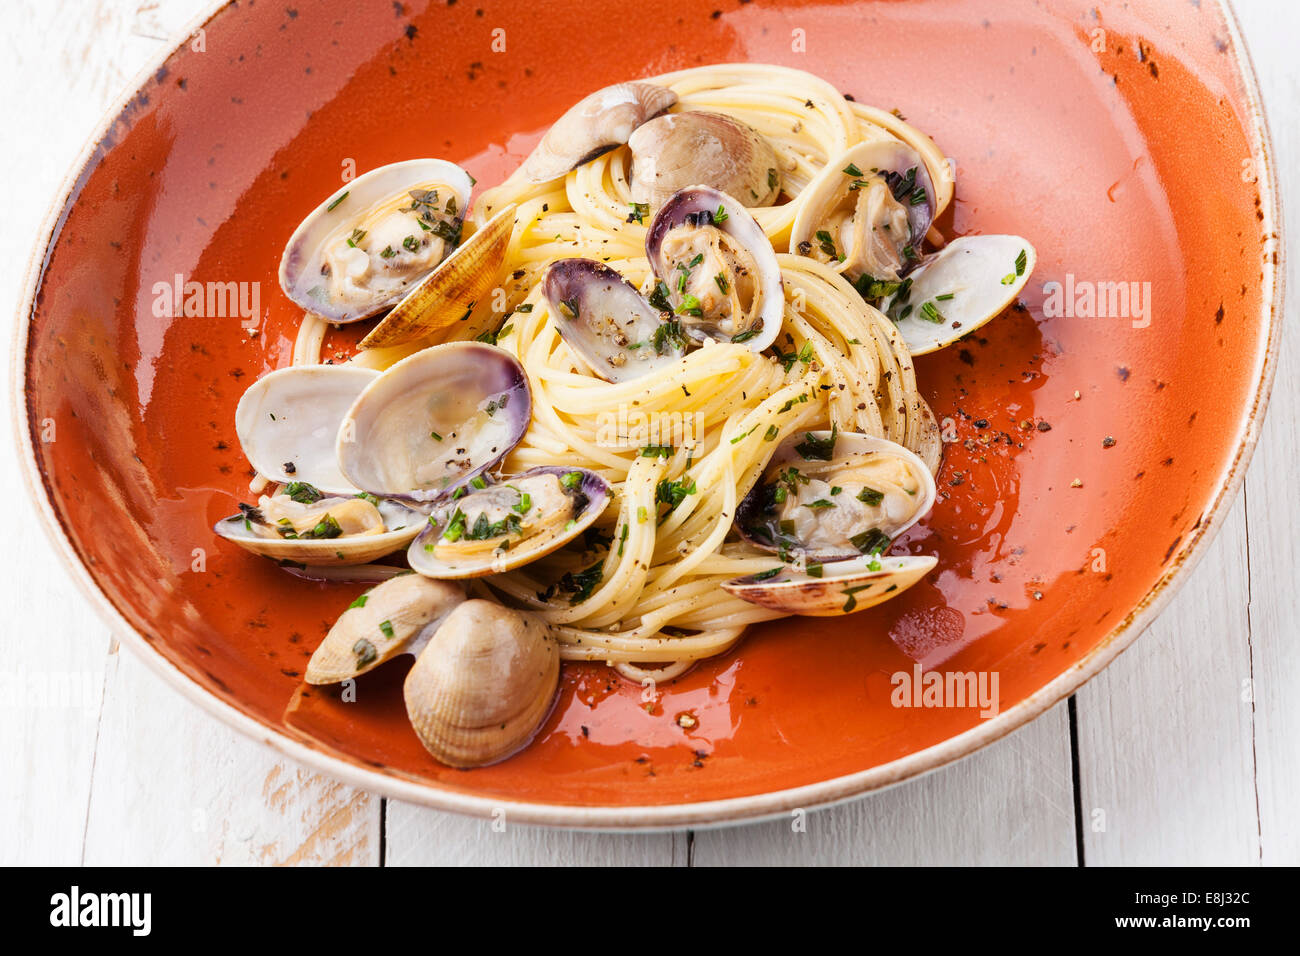 Seafood pasta with clams Spaghetti alle Vongole on orange plate Stock Photo